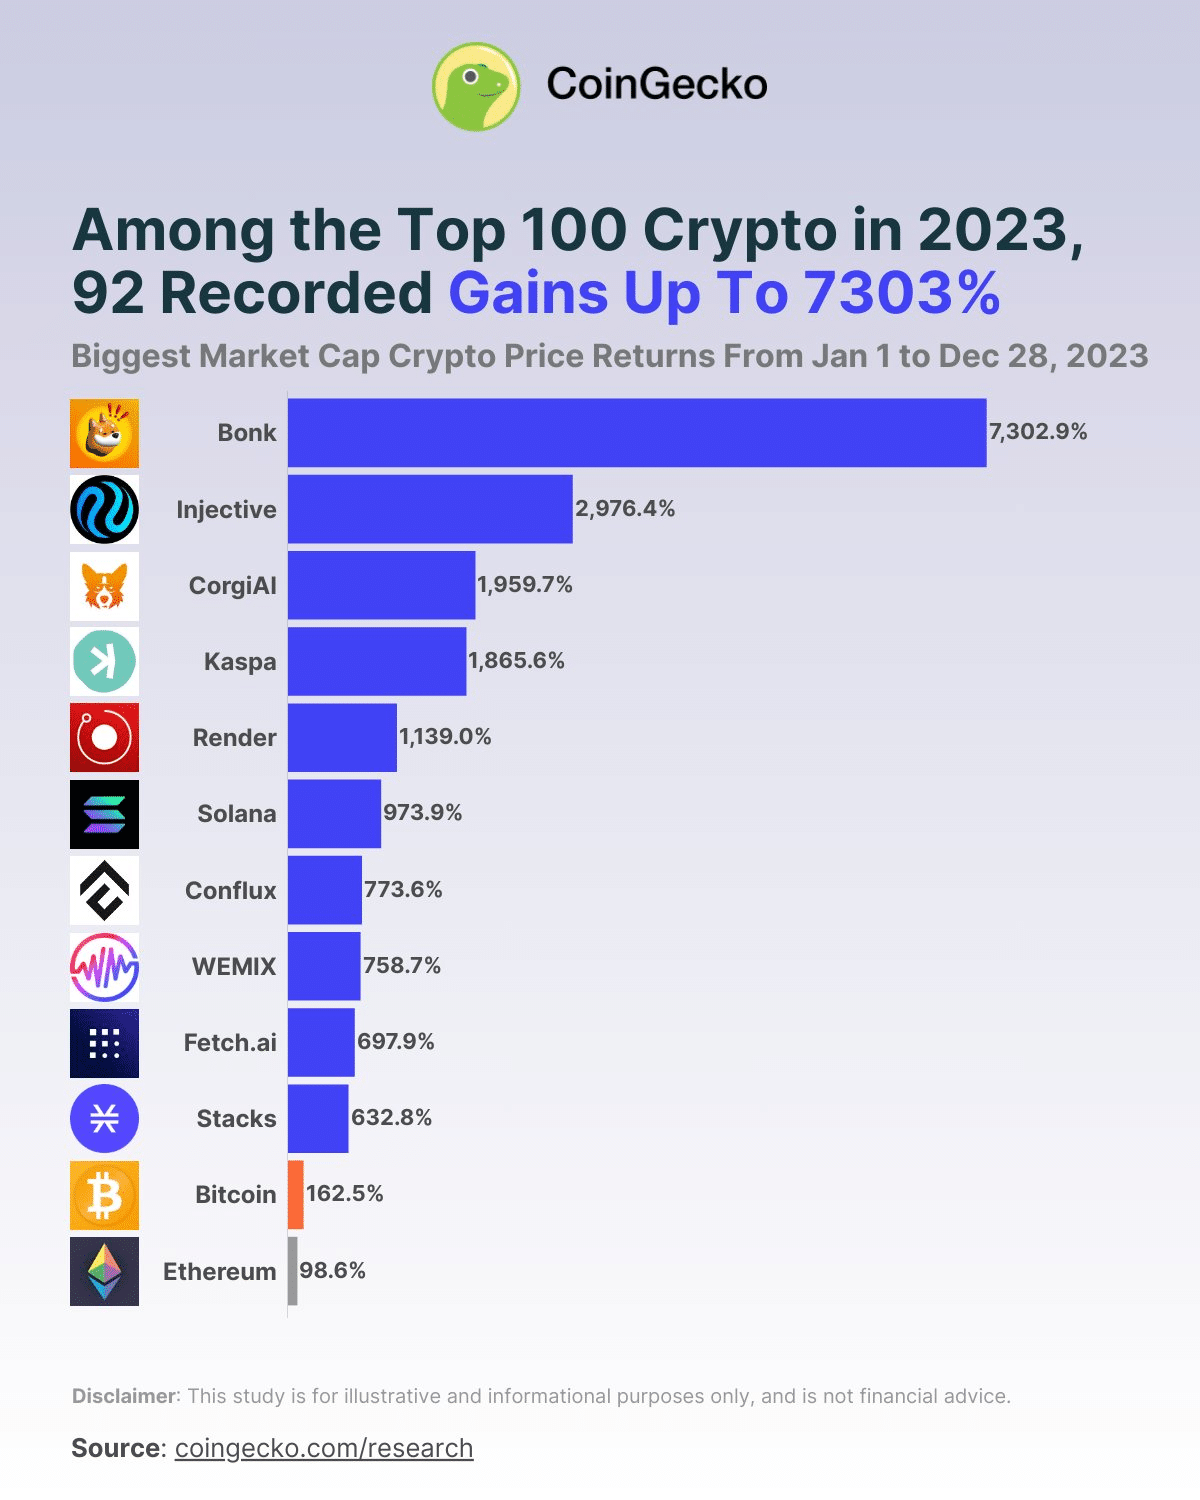 Bonk emerges as top crypto gainer in 2023 with staggering 7,302.9% gain - 1